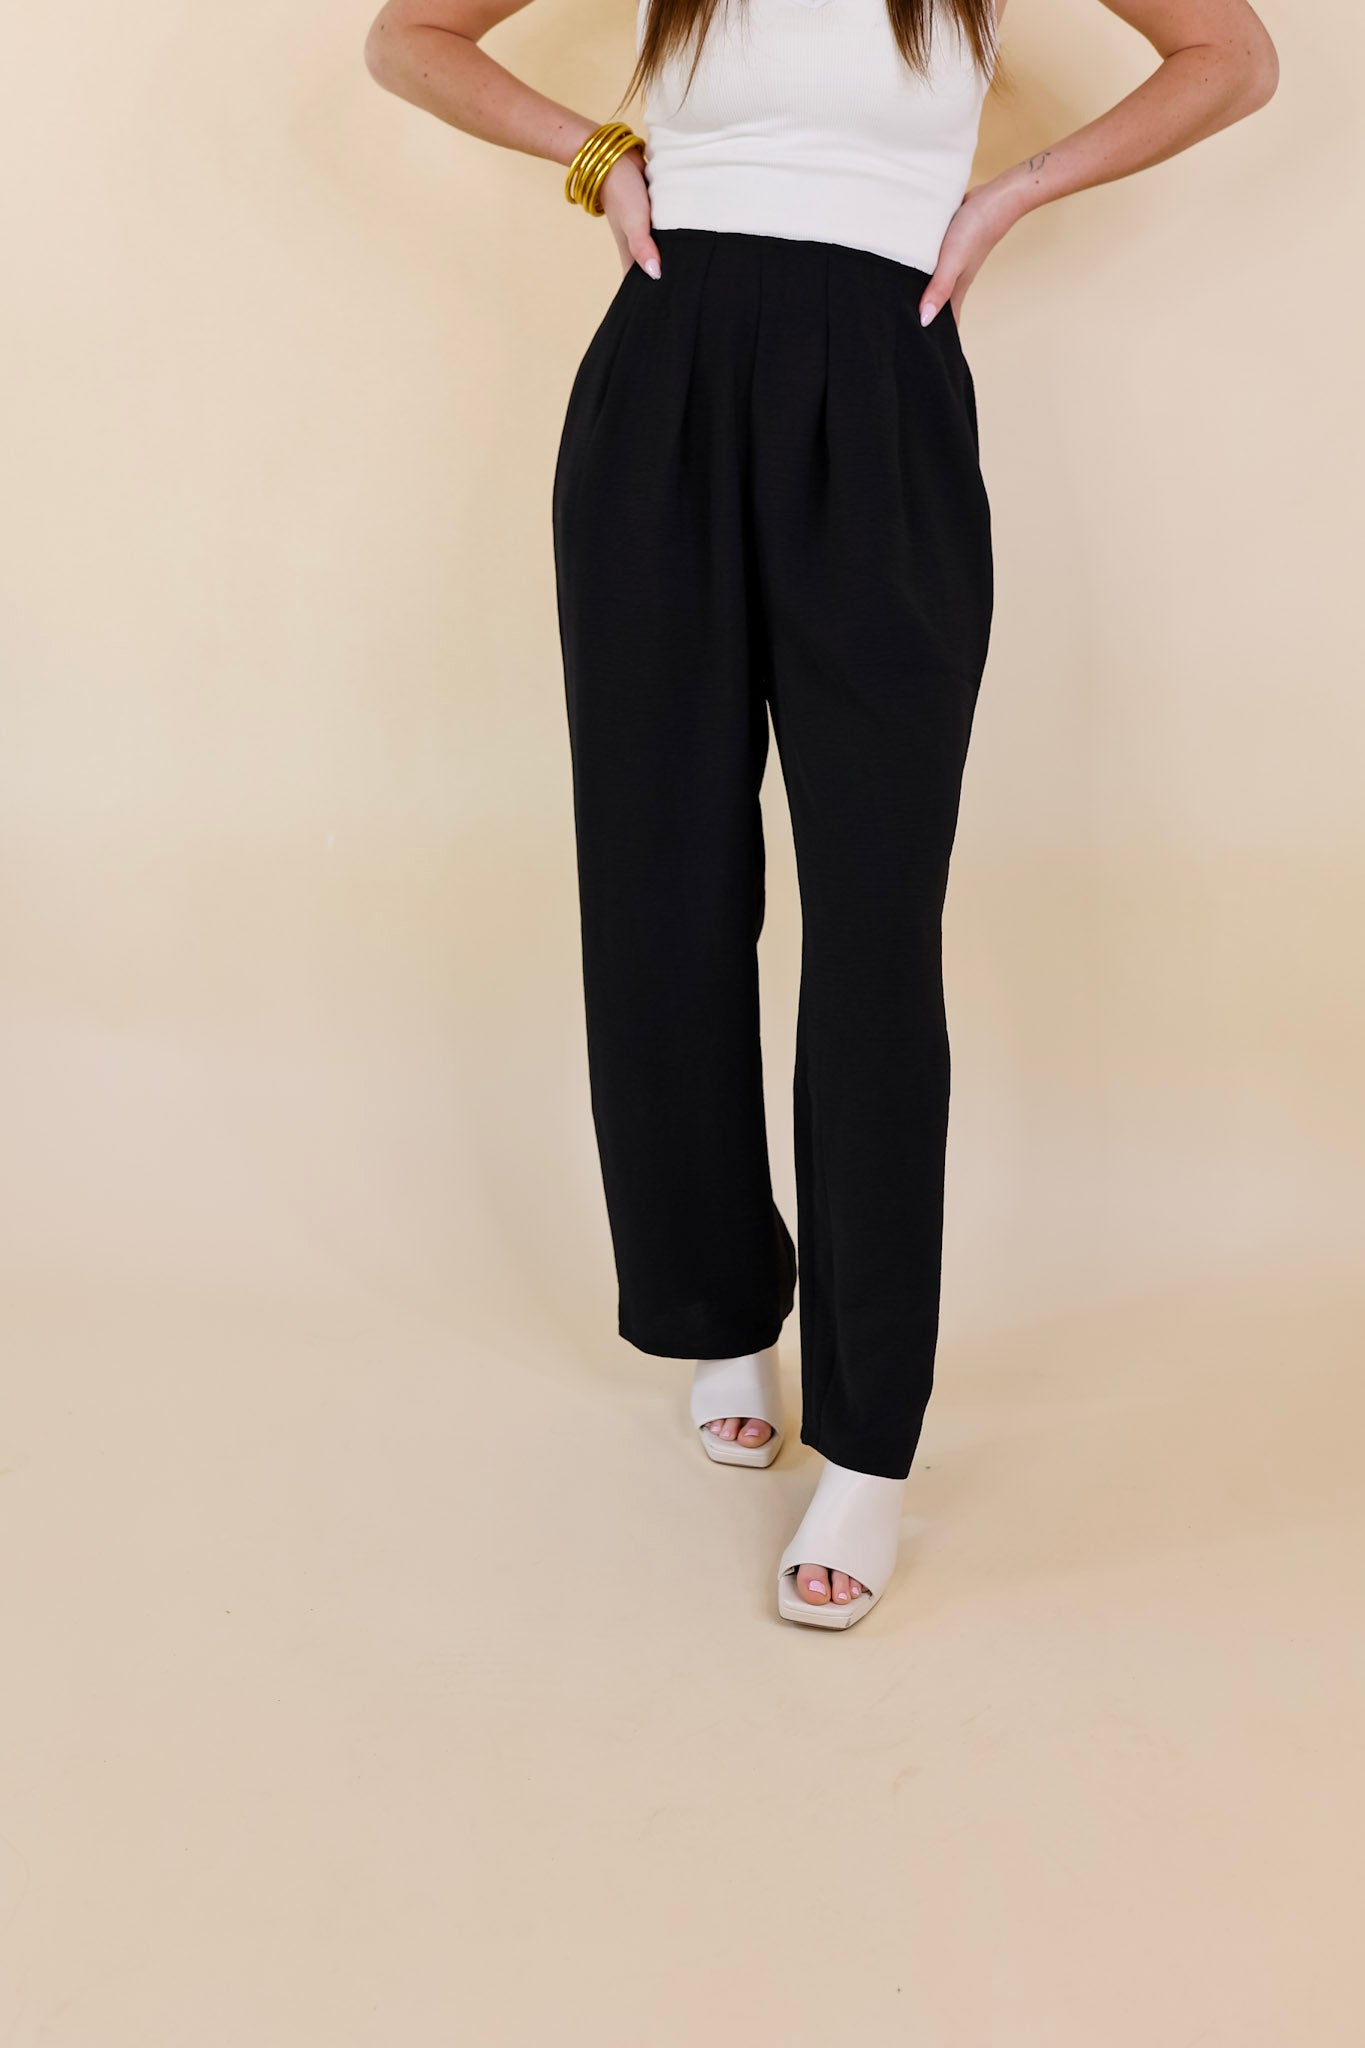 Trading Favors Pleated Detail Pants in Black - Giddy Up Glamour Boutique